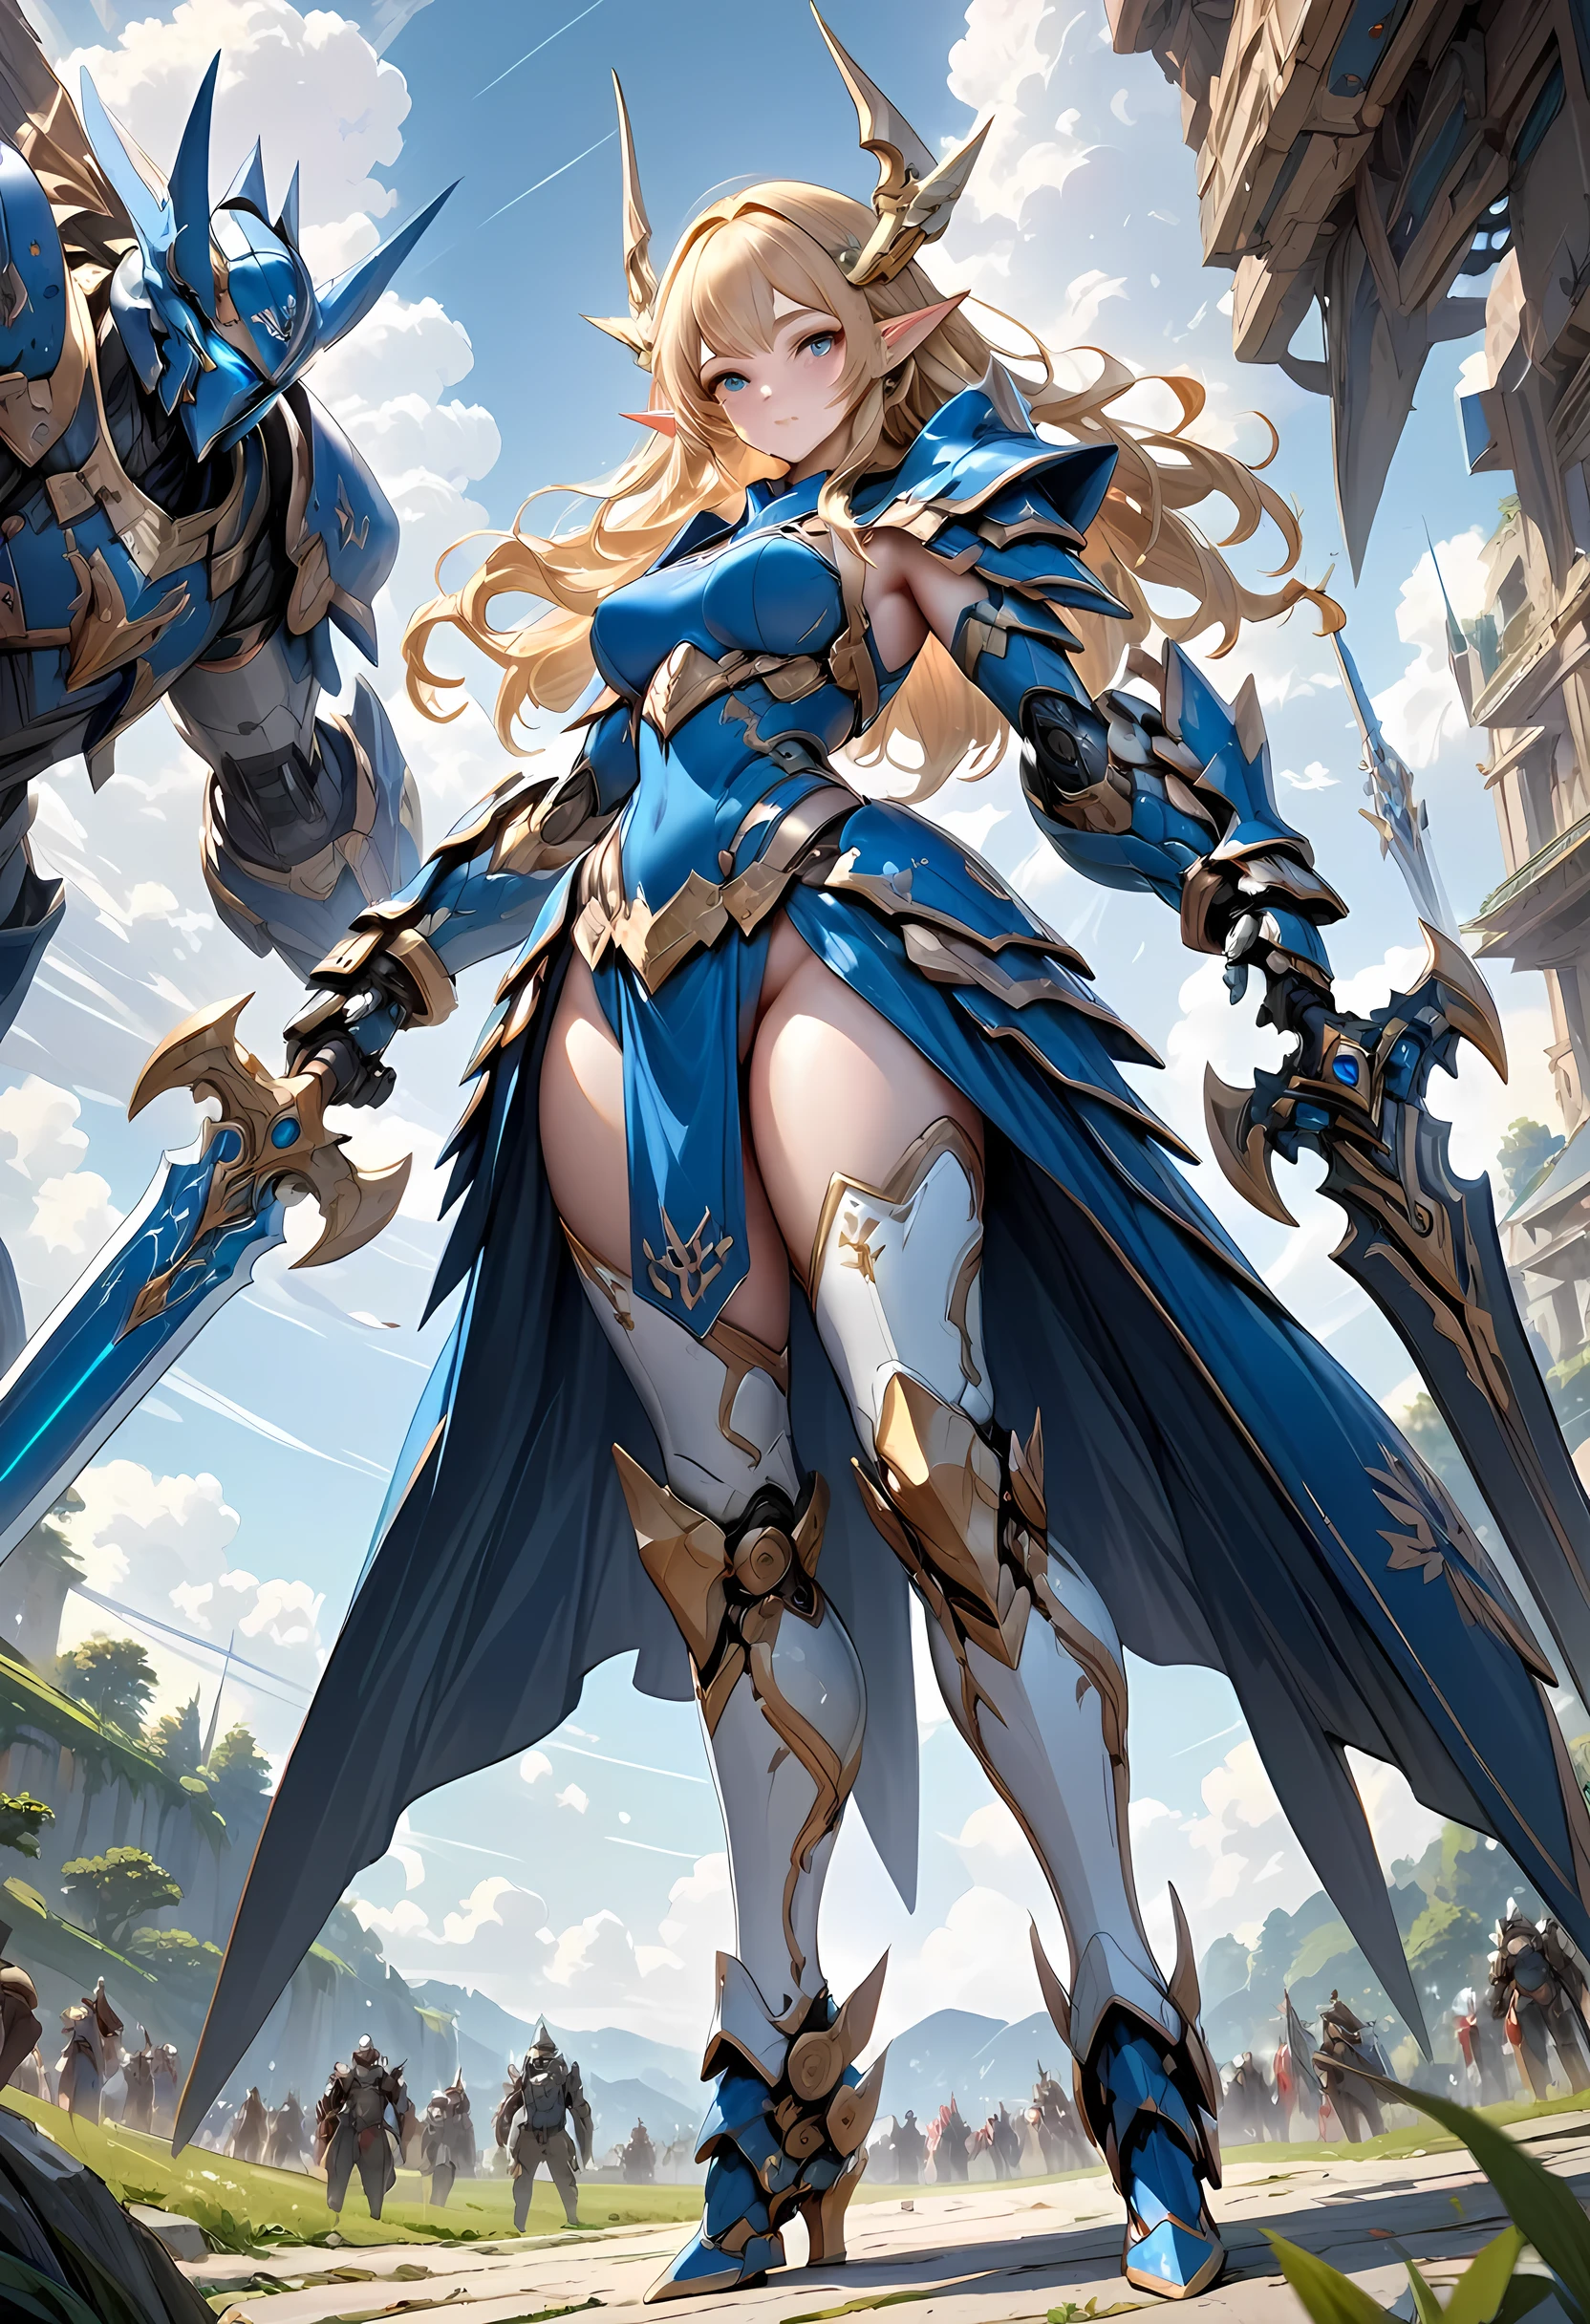 high details, best quality, 16k, [ultra detailed], masterpiece, best quality, (extremely detailed), full body, ultra wide shot, photorealistic, , fantasy art, dnd art, rpg art, realistic art, a wide angle, (((anatomically correct))) a wallpaper of an elf knight, elf warrior, princess knight, shinning knight, ready for battle with her mount (intense details, Masterpiece, best quality: 1.5), female elf (intense details, Masterpiece, best quality: 1.5), ultra detailed face, ultra feminine, fair skin, exquisite beauty, gold hair, long hair, wavy hair, small pointed ears, dynamic eyes color, wearing heavy mech armor, shinning metal, armed with elven sword, green meadows, blue skies background and some clouds background depth of field (intricate details, Masterpiece, best quality: 1.5), full body (intricate details, Masterpiece, best quality: 1.5), high details, best quality, highres, ultra wide angle, cybrk